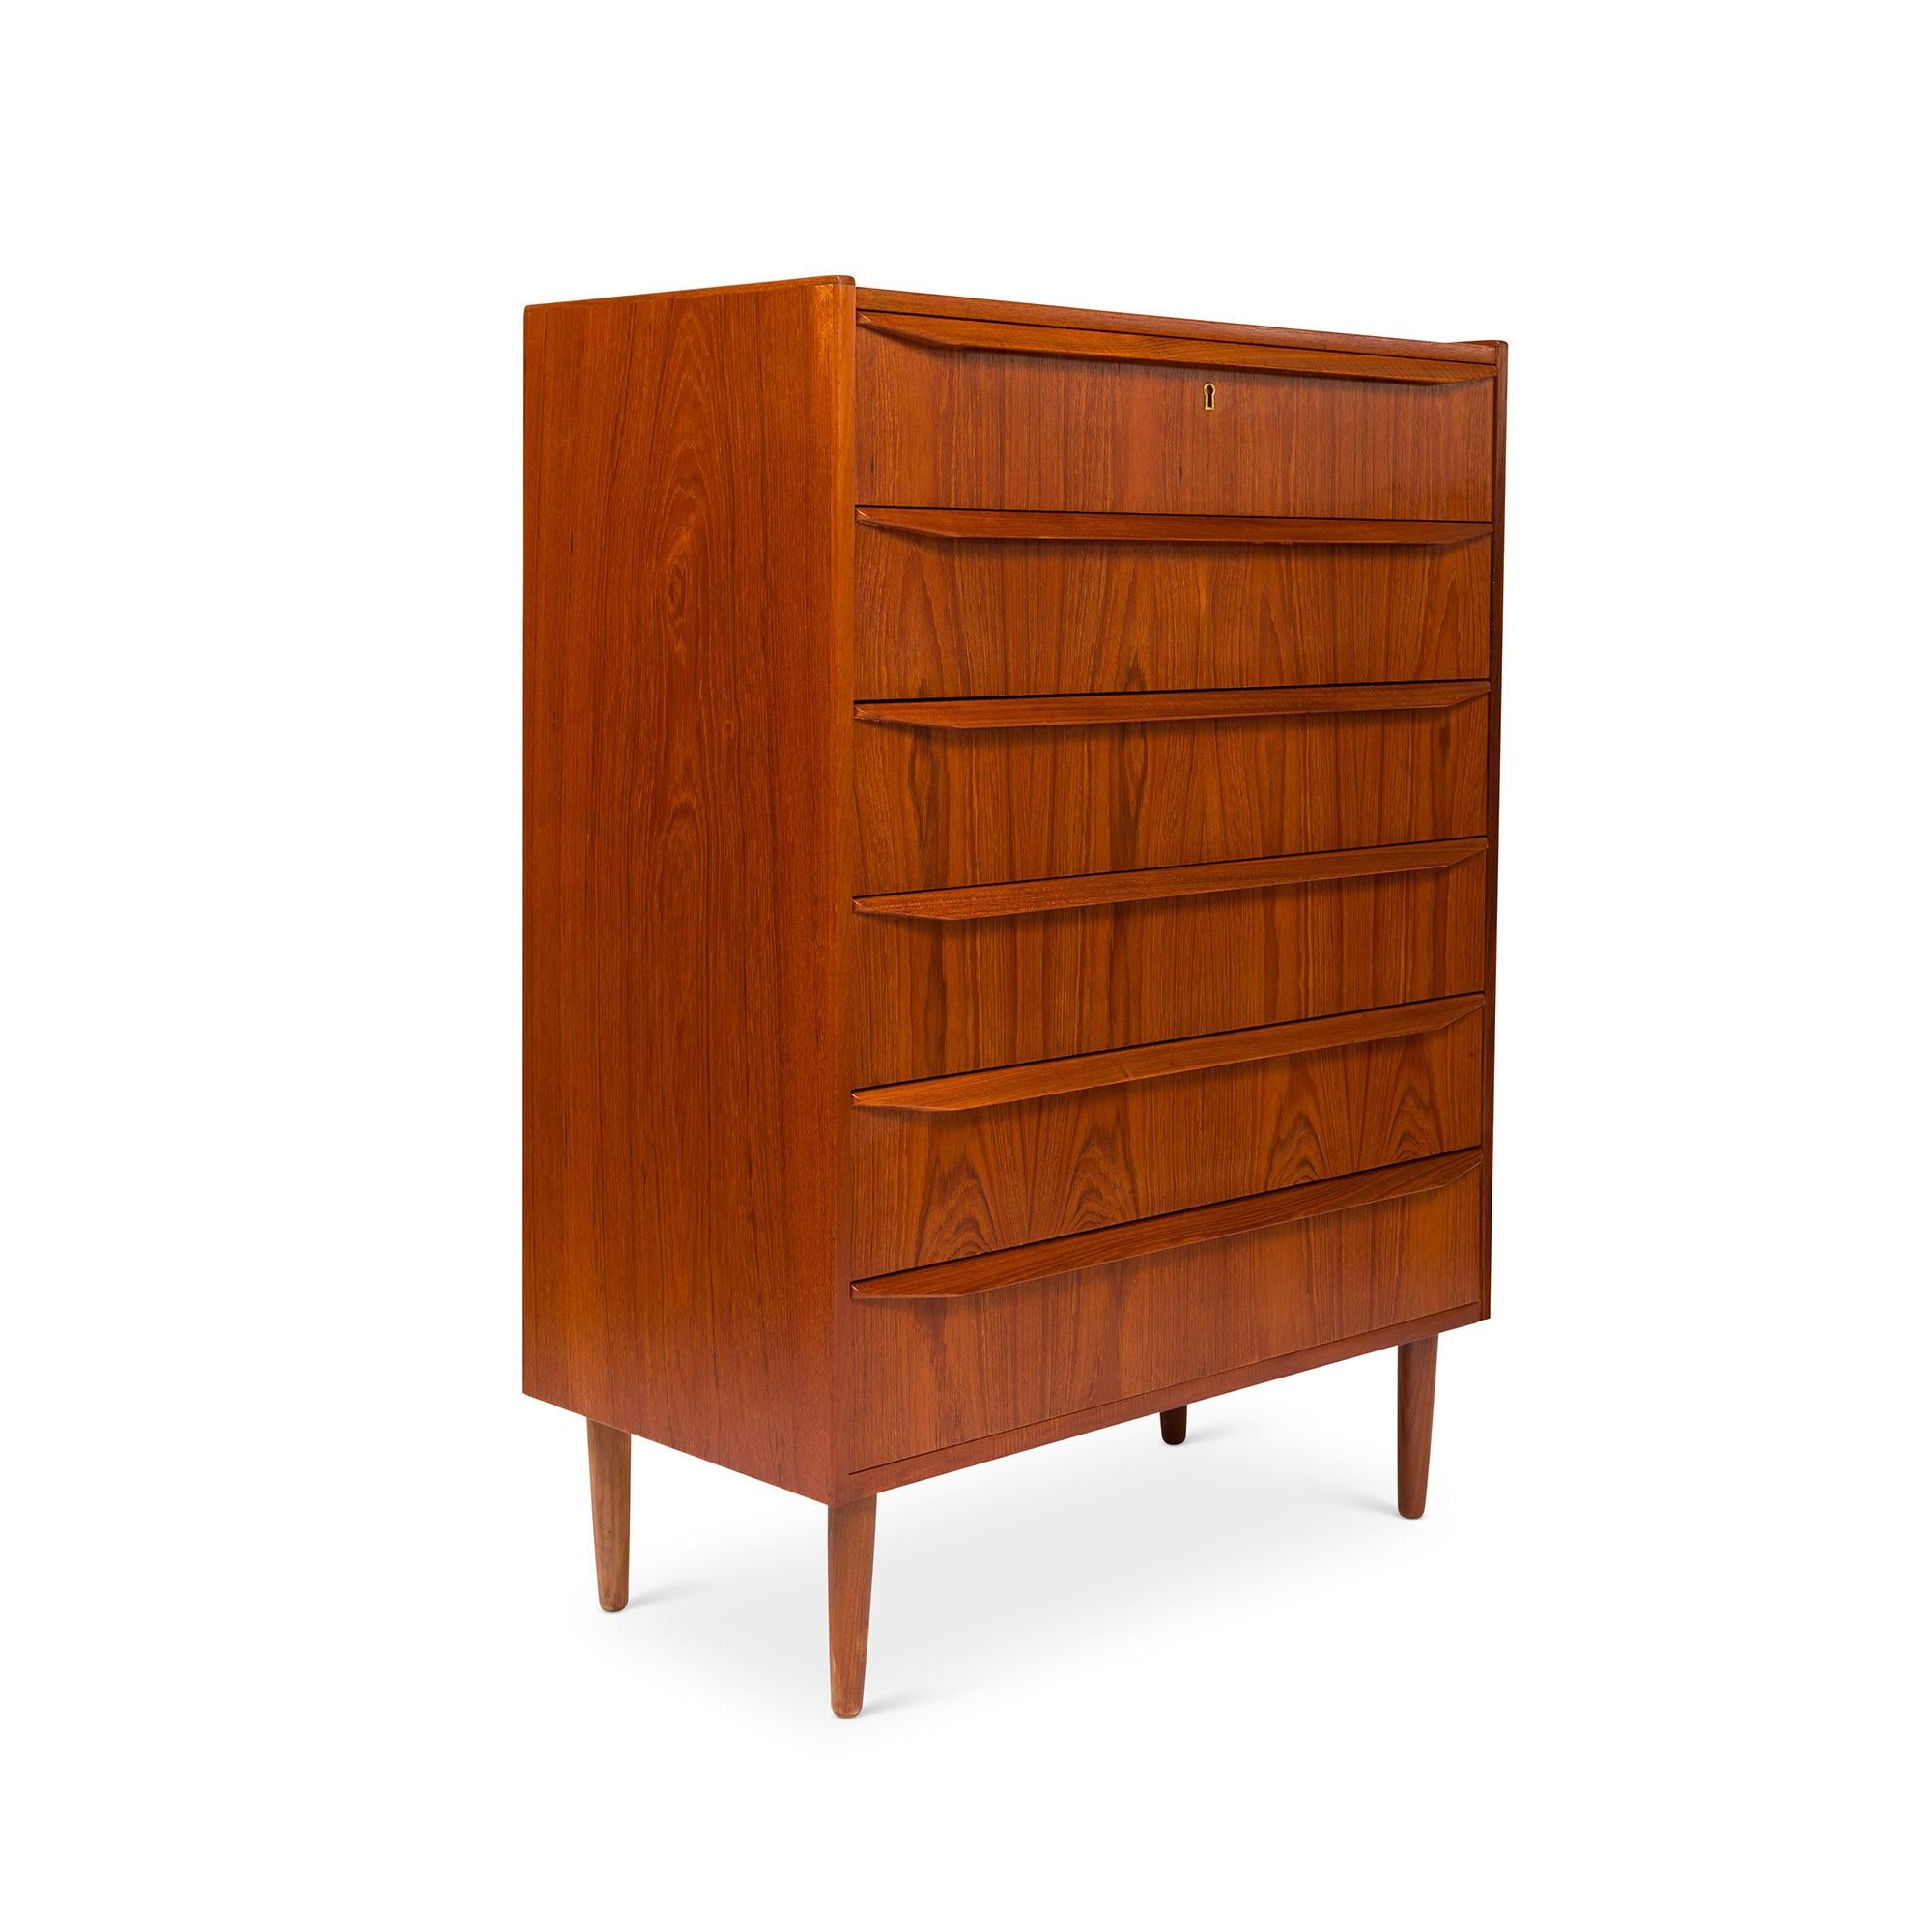 A stunning 1960s vintage Danish mid-century six-drawer teak tallboy dresser stands as an emblem of timeless design. The chest of drawers exhibits a mesmerizing teak grain, complemented by elongated sculpted drawer pulls. Its embodiment of the Danish